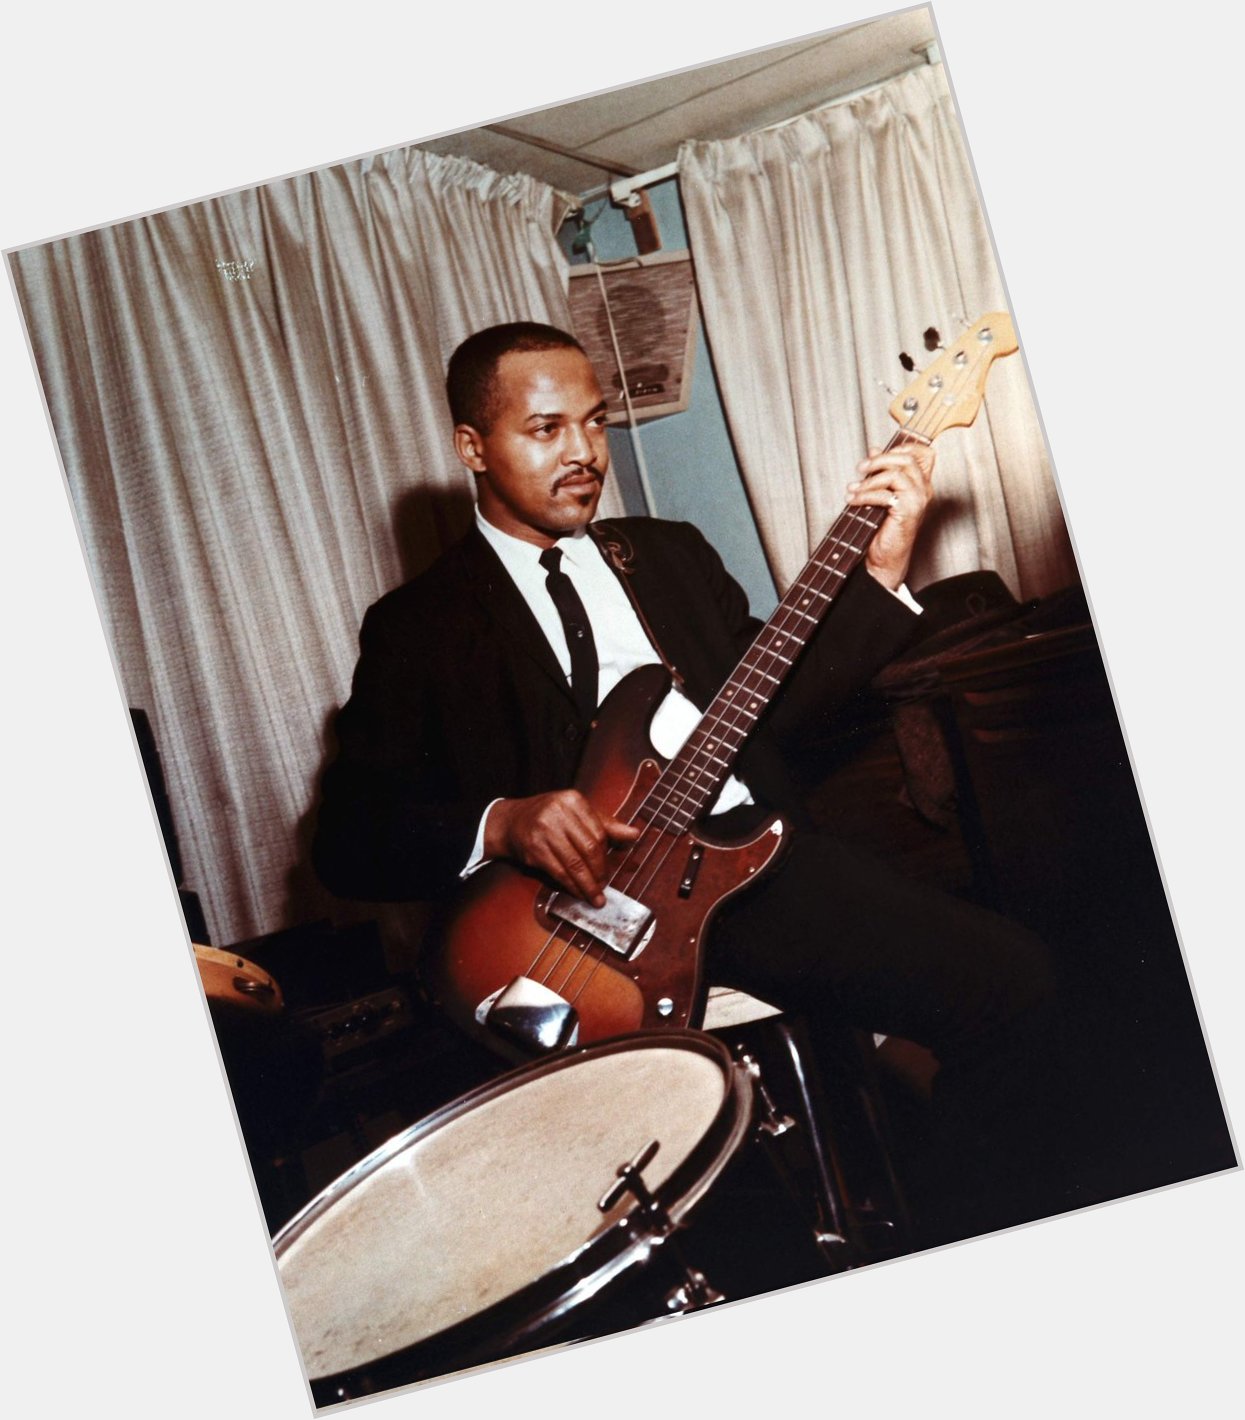 Happy Heavenly Birthday to the king of Motown Musicians, James Jamerson.  